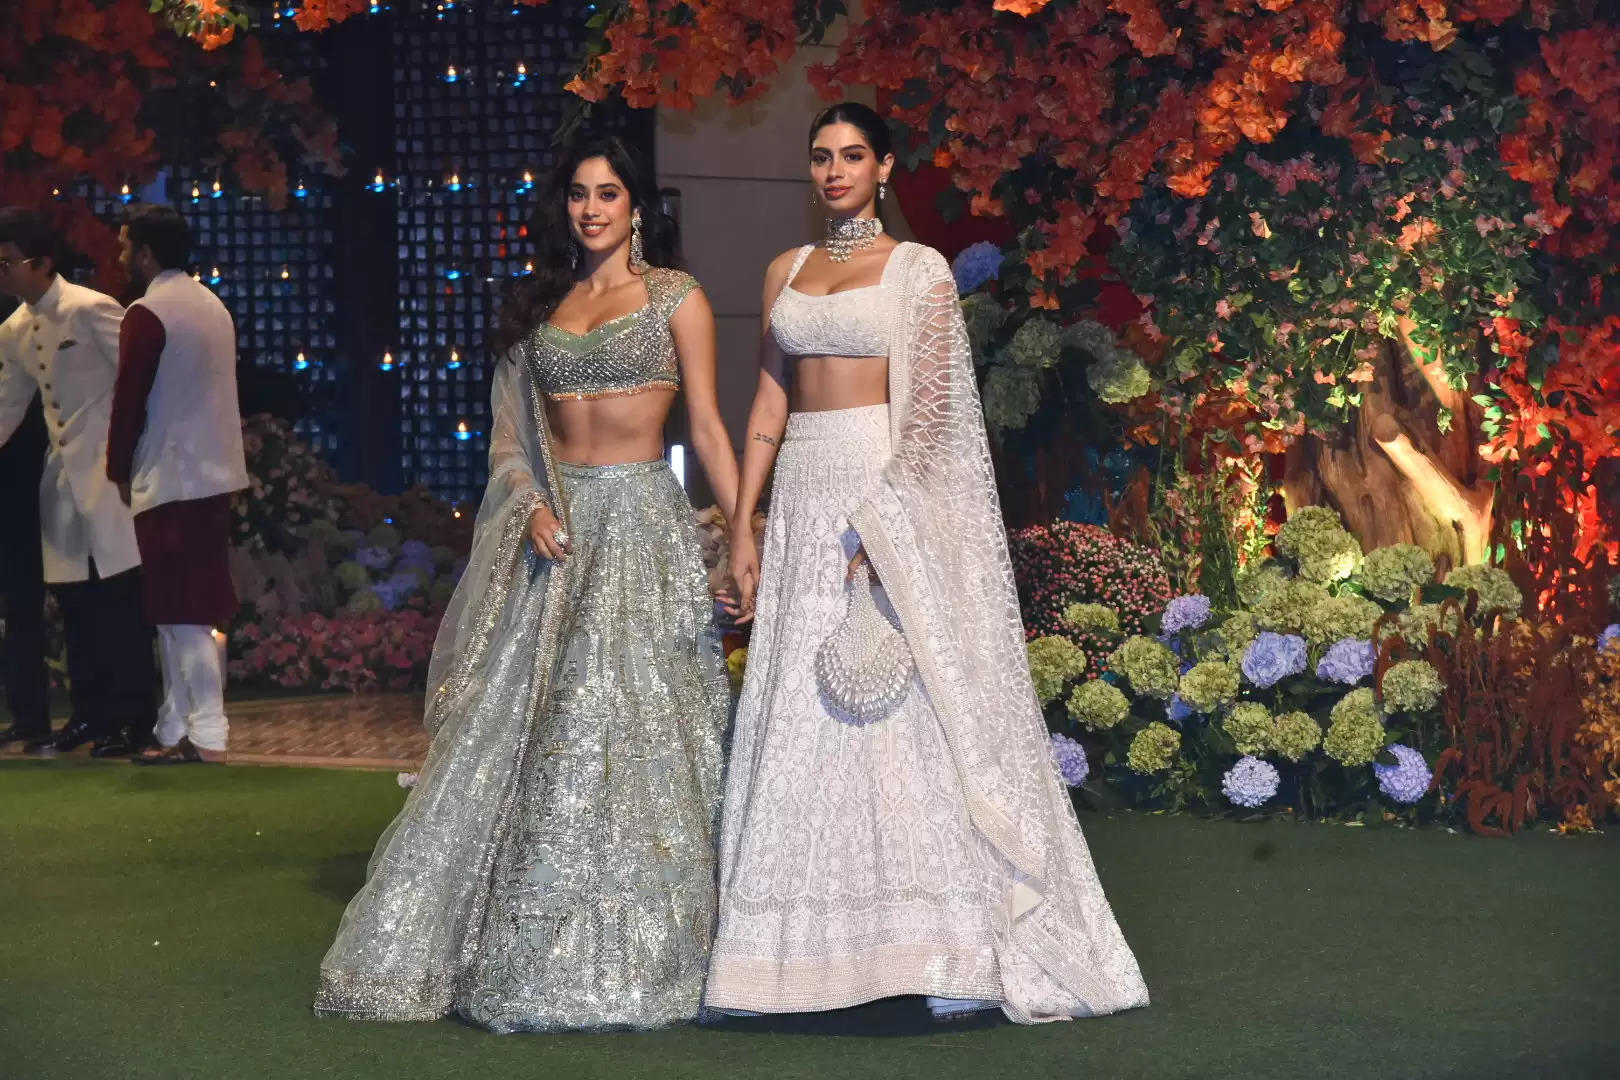 Photos: Ananya Panday To Sonam Kapoor, These Divas Look Pretty In White Festive Looks